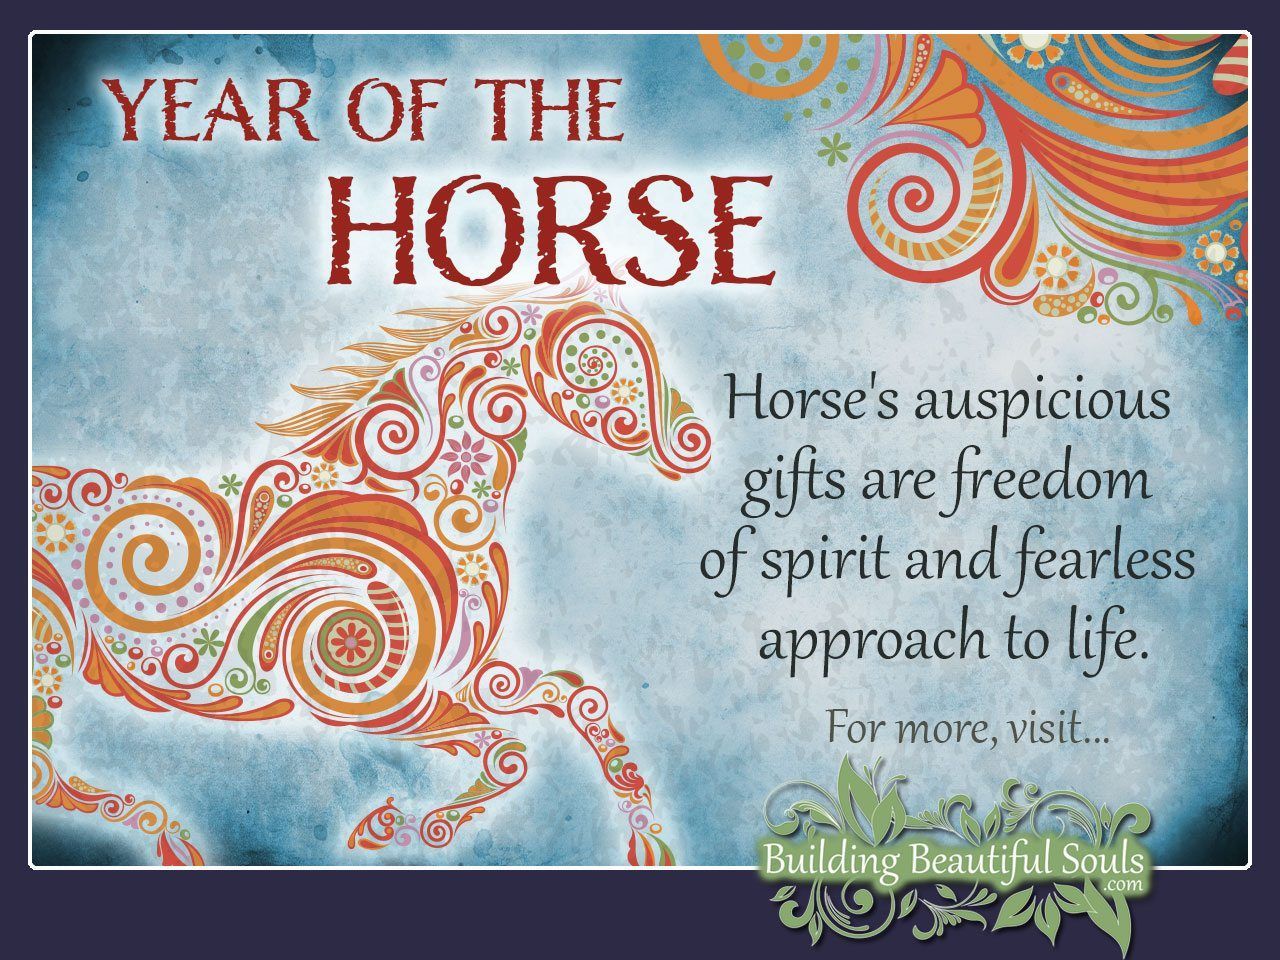 Chinese Zodiac Horse | Year of the Horse | Chinese Zodiac Signs Meanings